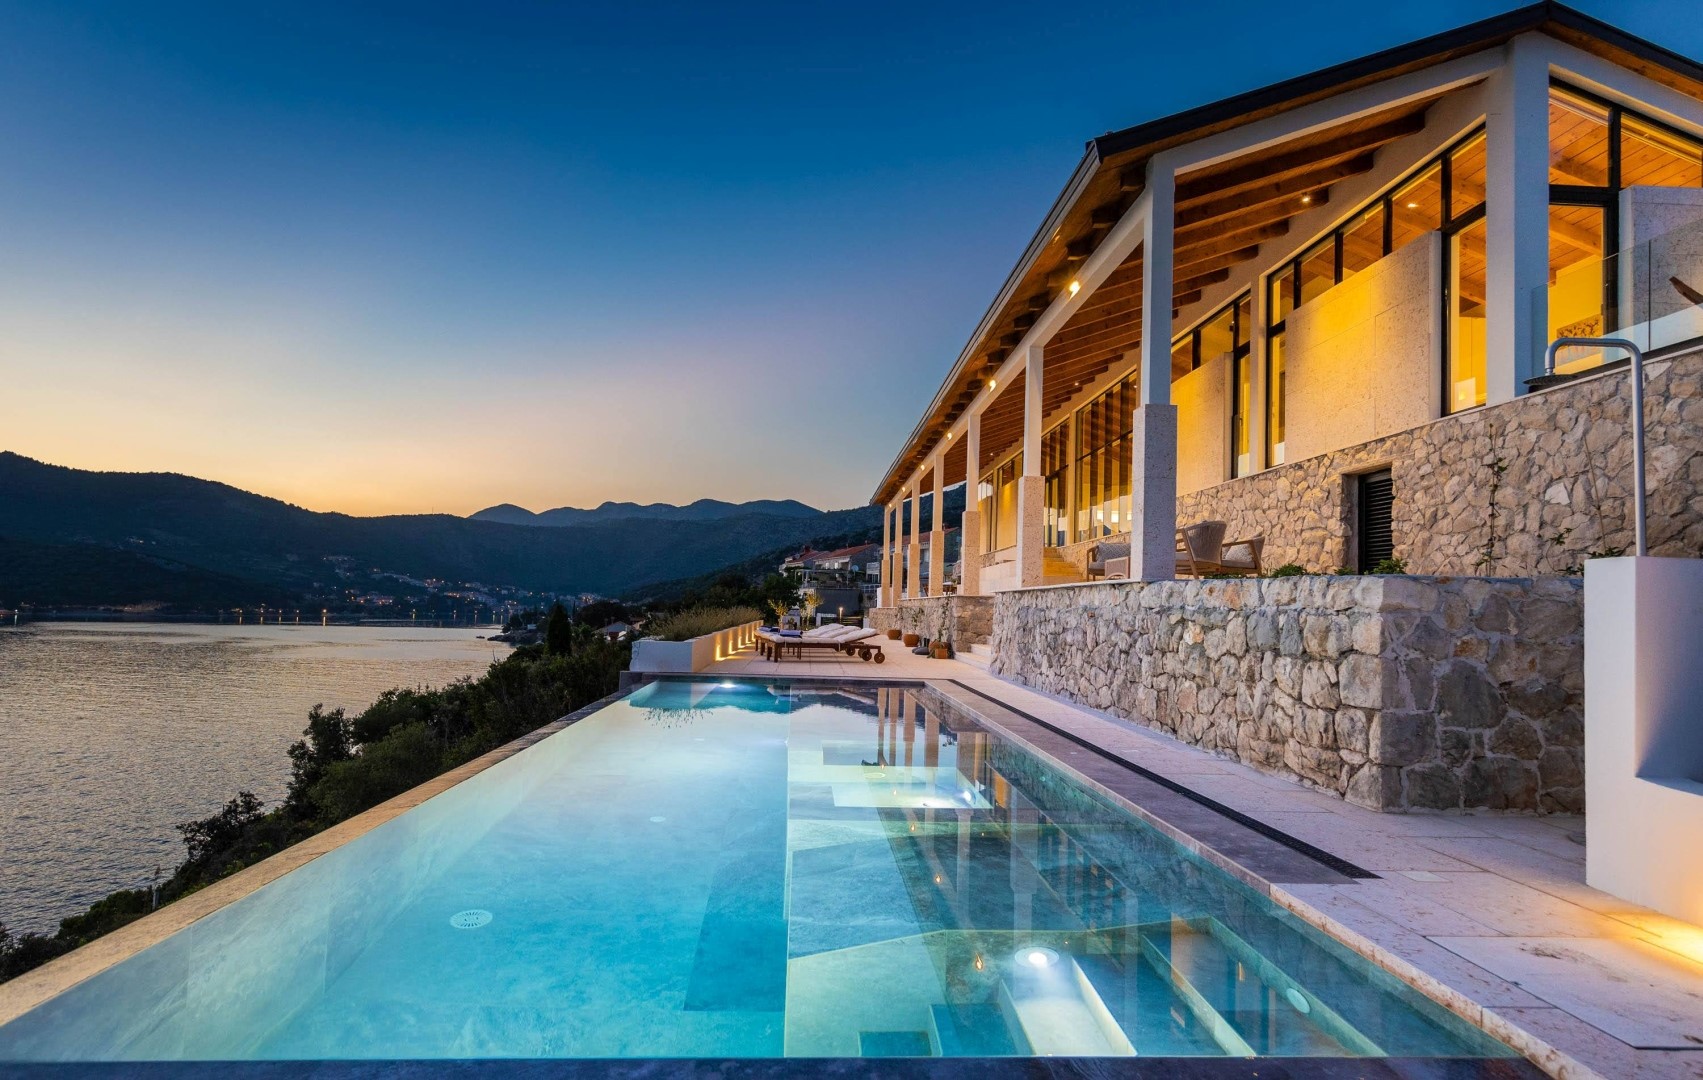 Dubrovnik seafront luxury villa Crystal Palace with infinity pool for vacation and rent.